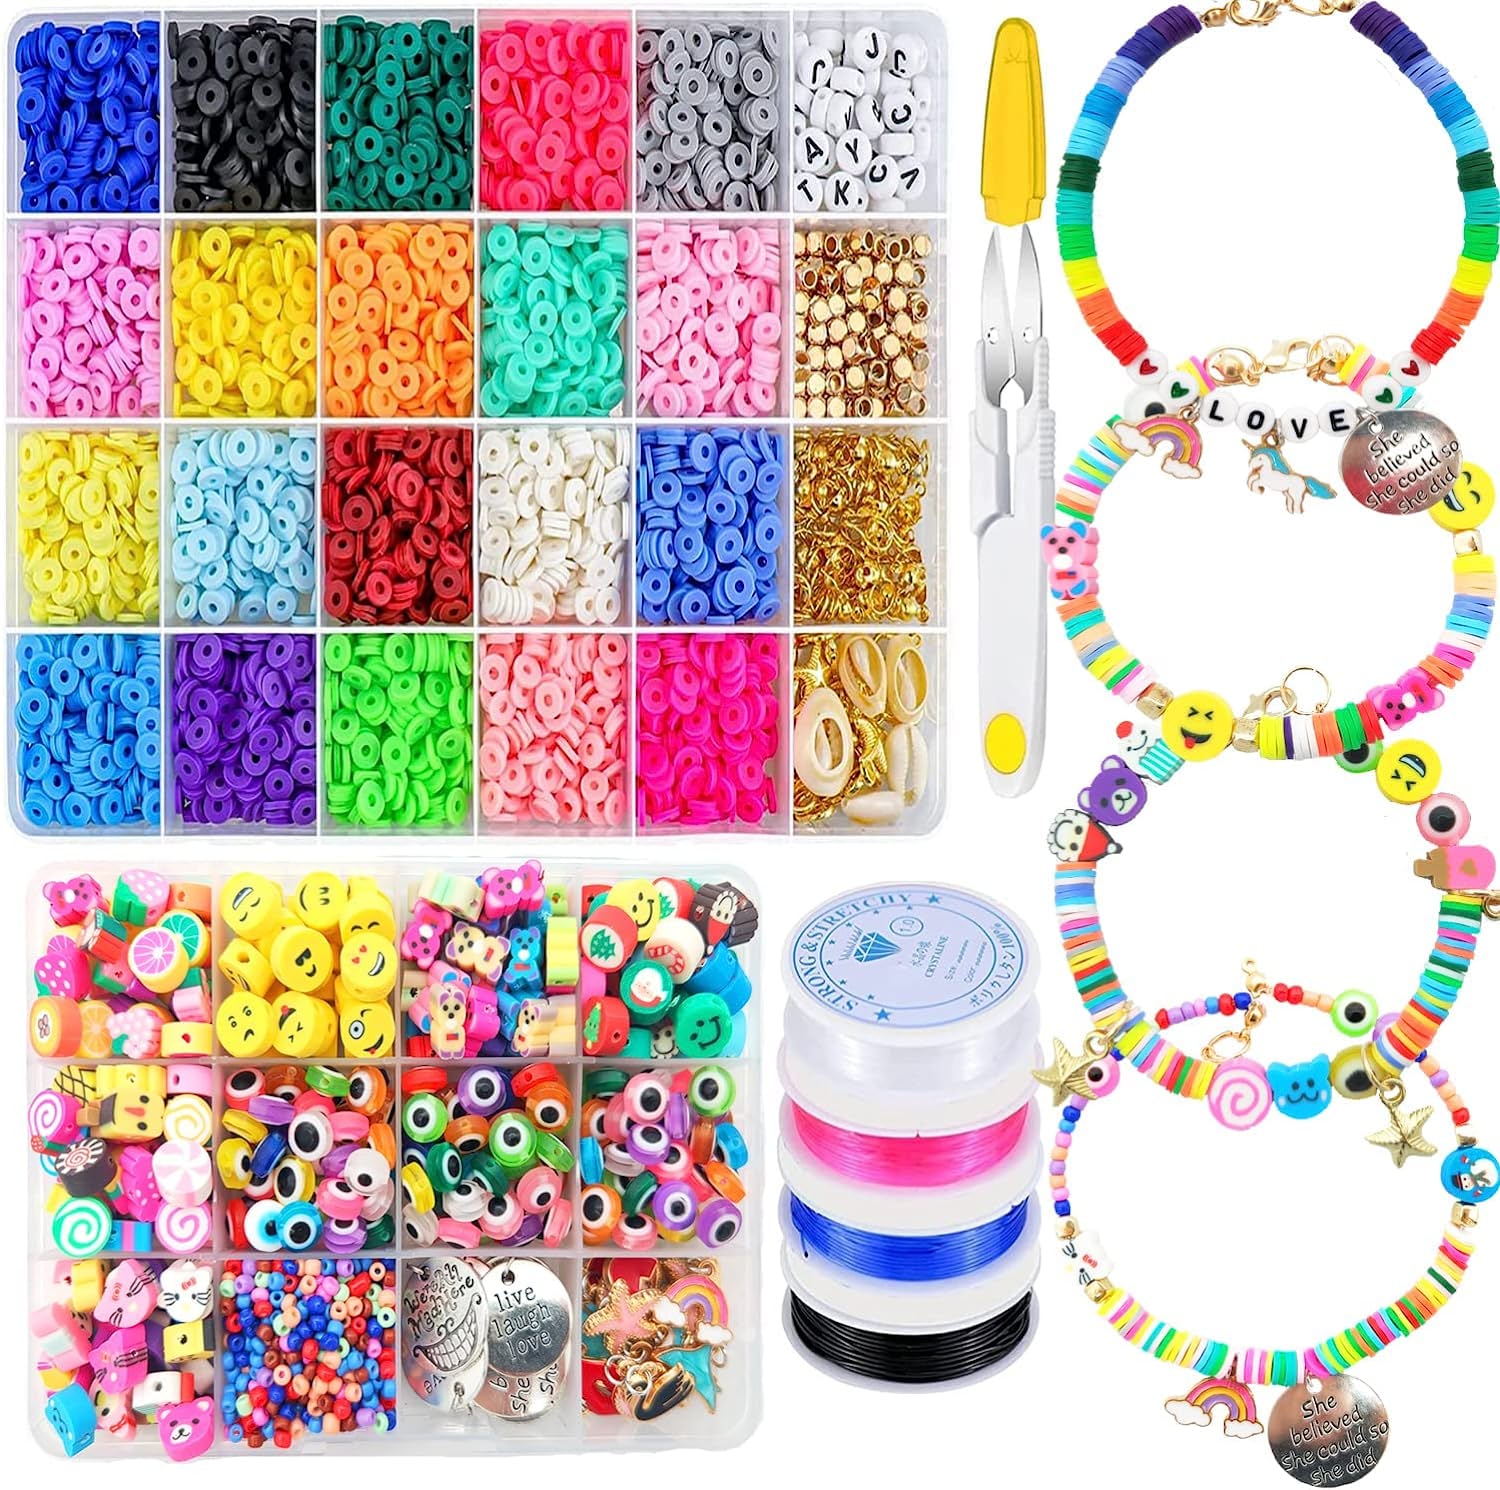 SEMATA 750Pcs Beads for Bracelets Making Kit DIY Pearl Jewelry Adults  Charms String Crystal Girls Supplies